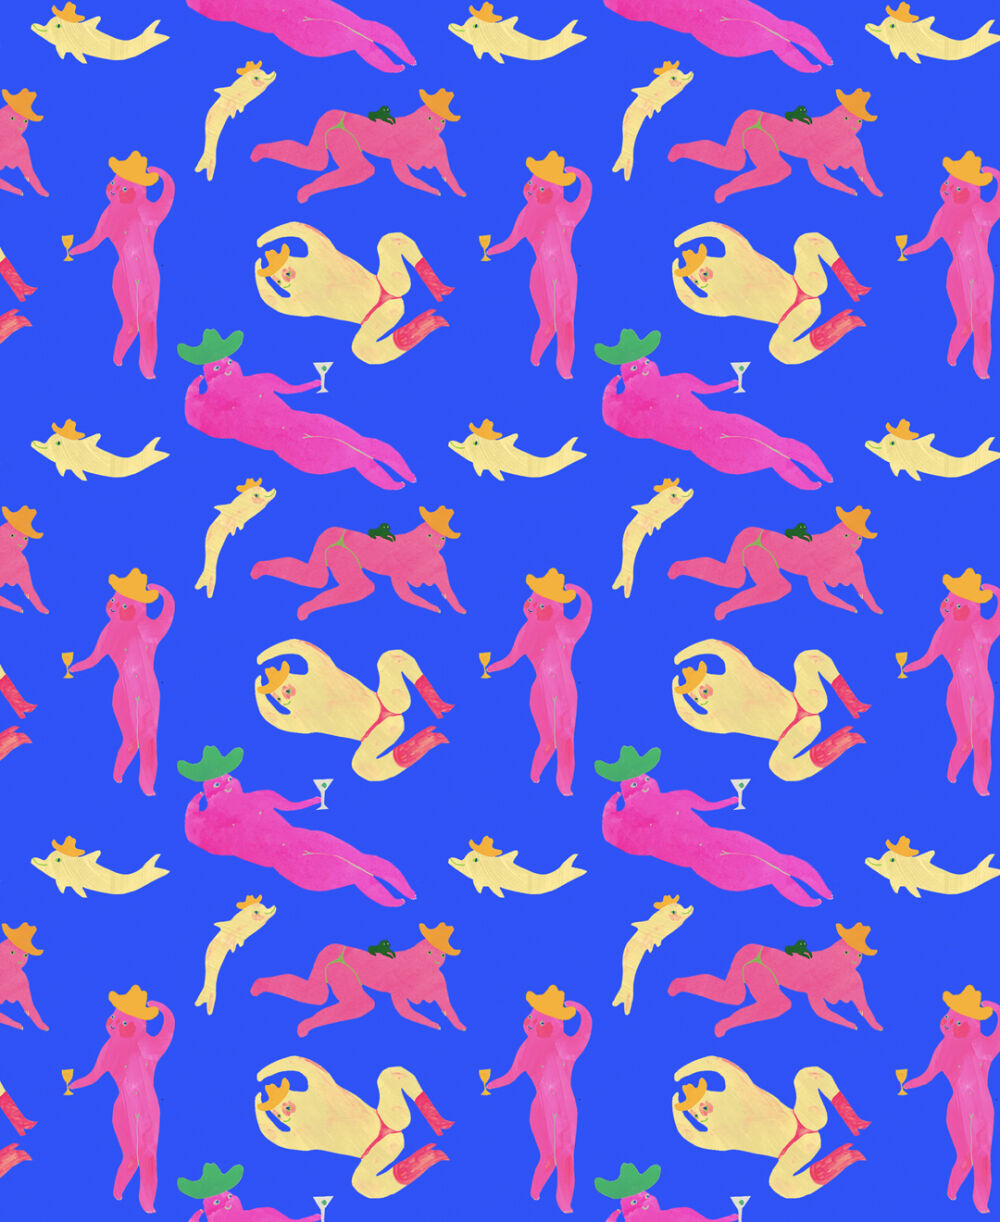 Pattern in bright and bold colors by Yoyo Nasty